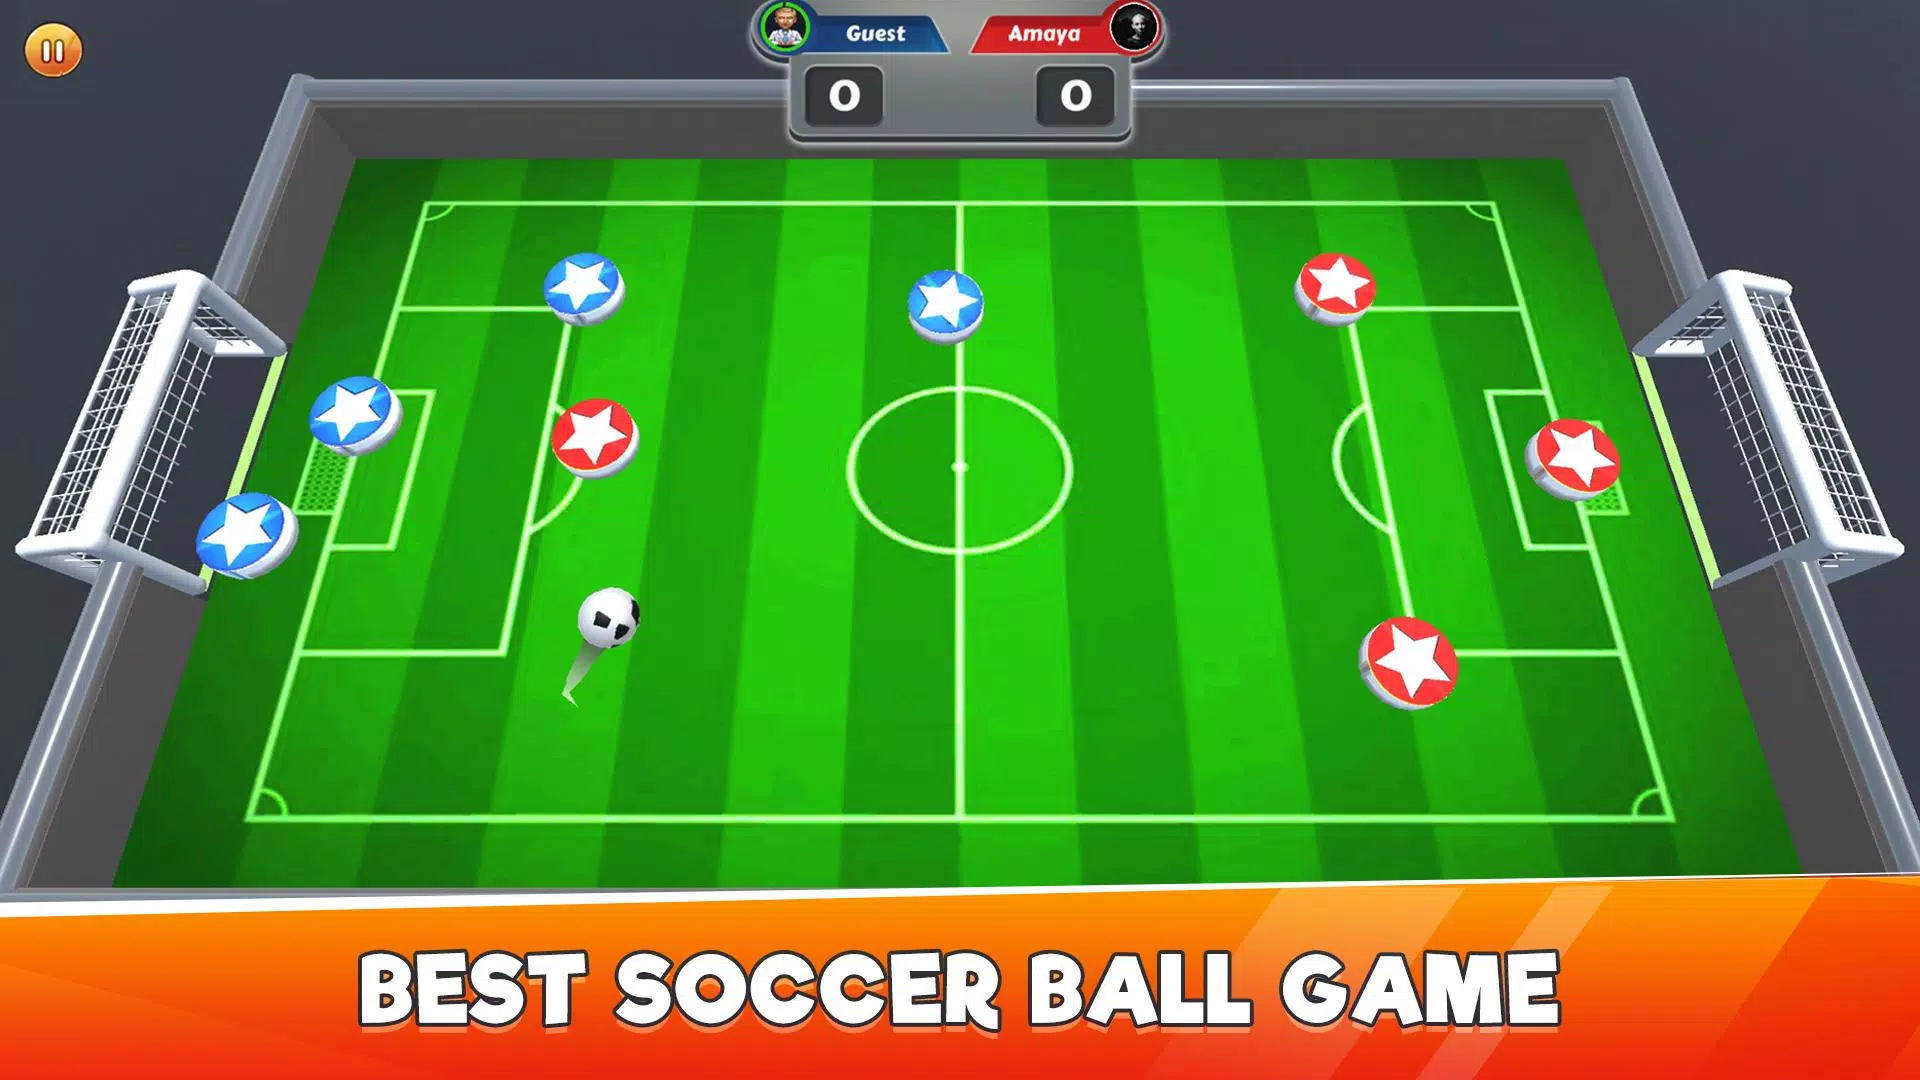 Sporta - Online Sports Game for Android - APK Download